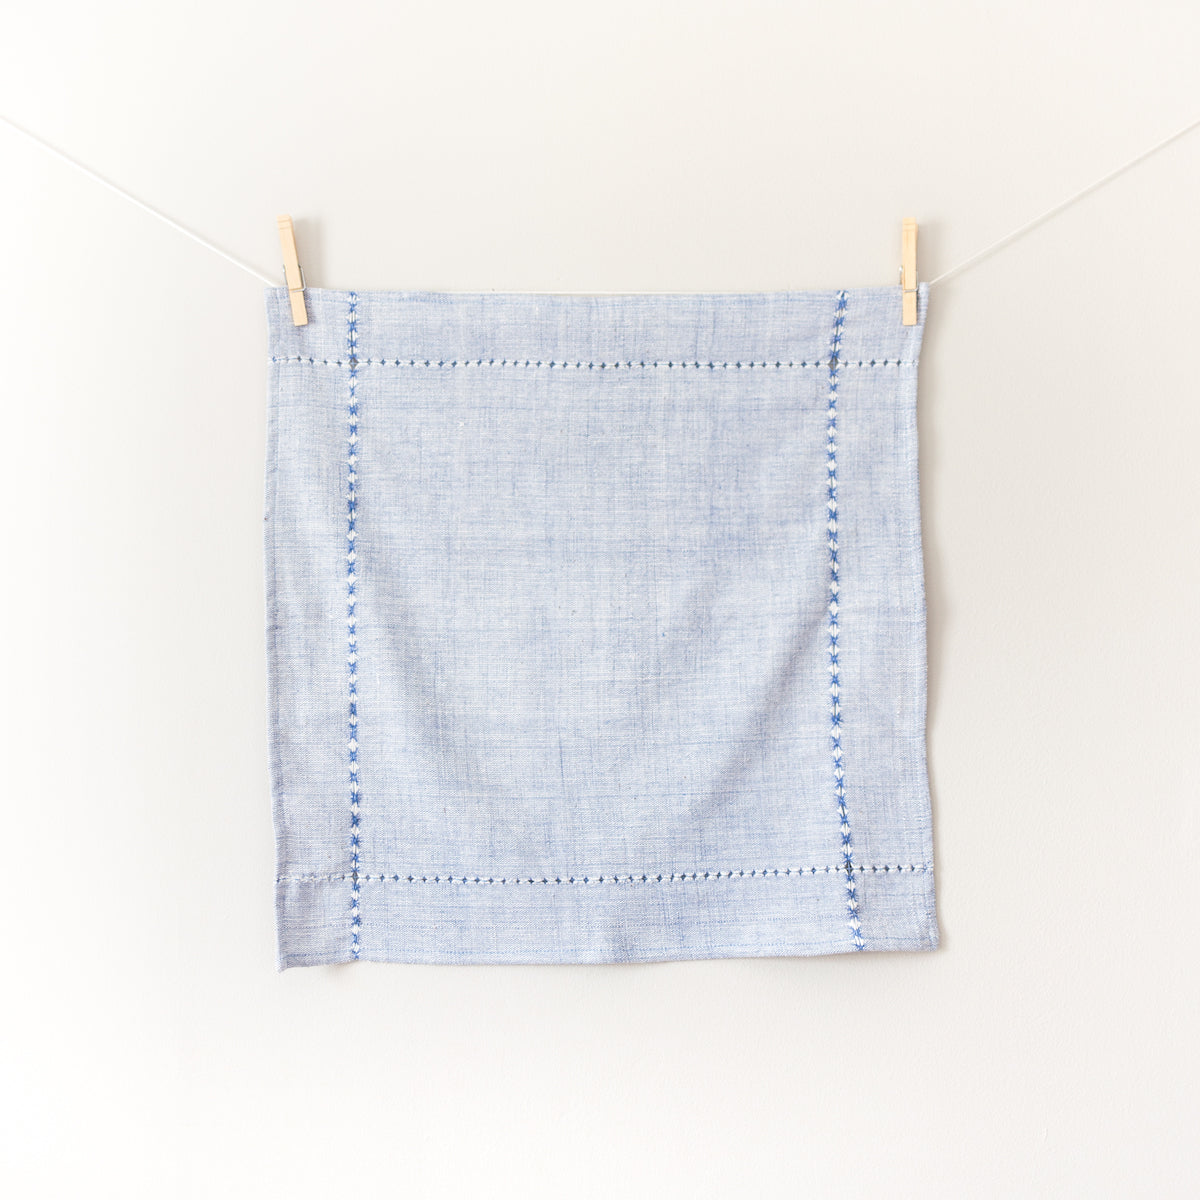 Pulled Cotton Napkins by Creative Women